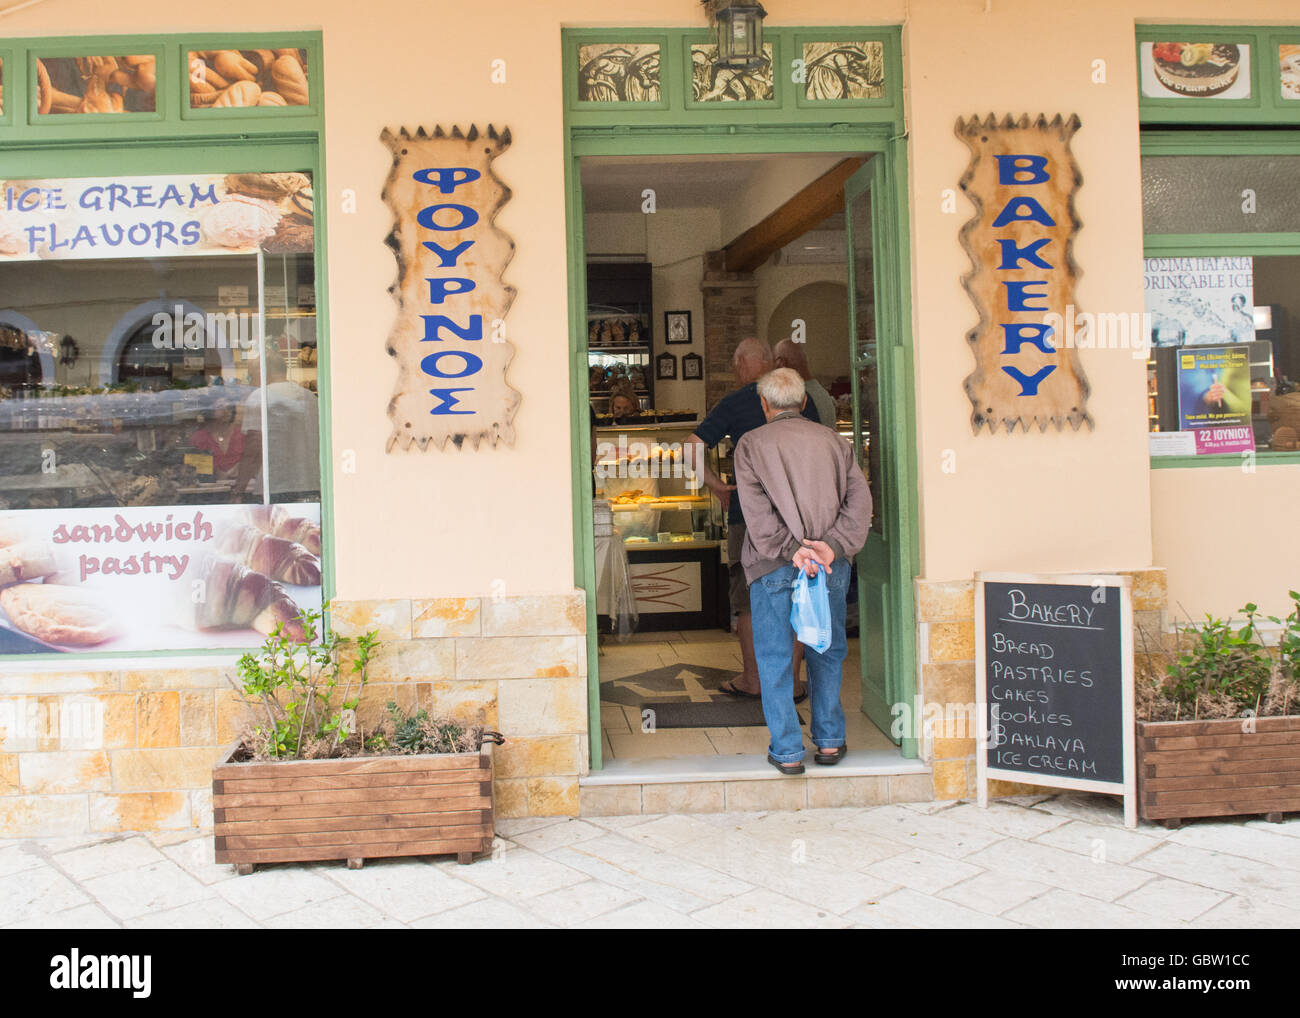 men queuing for morning bread and pastries at the bakery - Lakka, Paxos, Greece, Europe Stock Photo